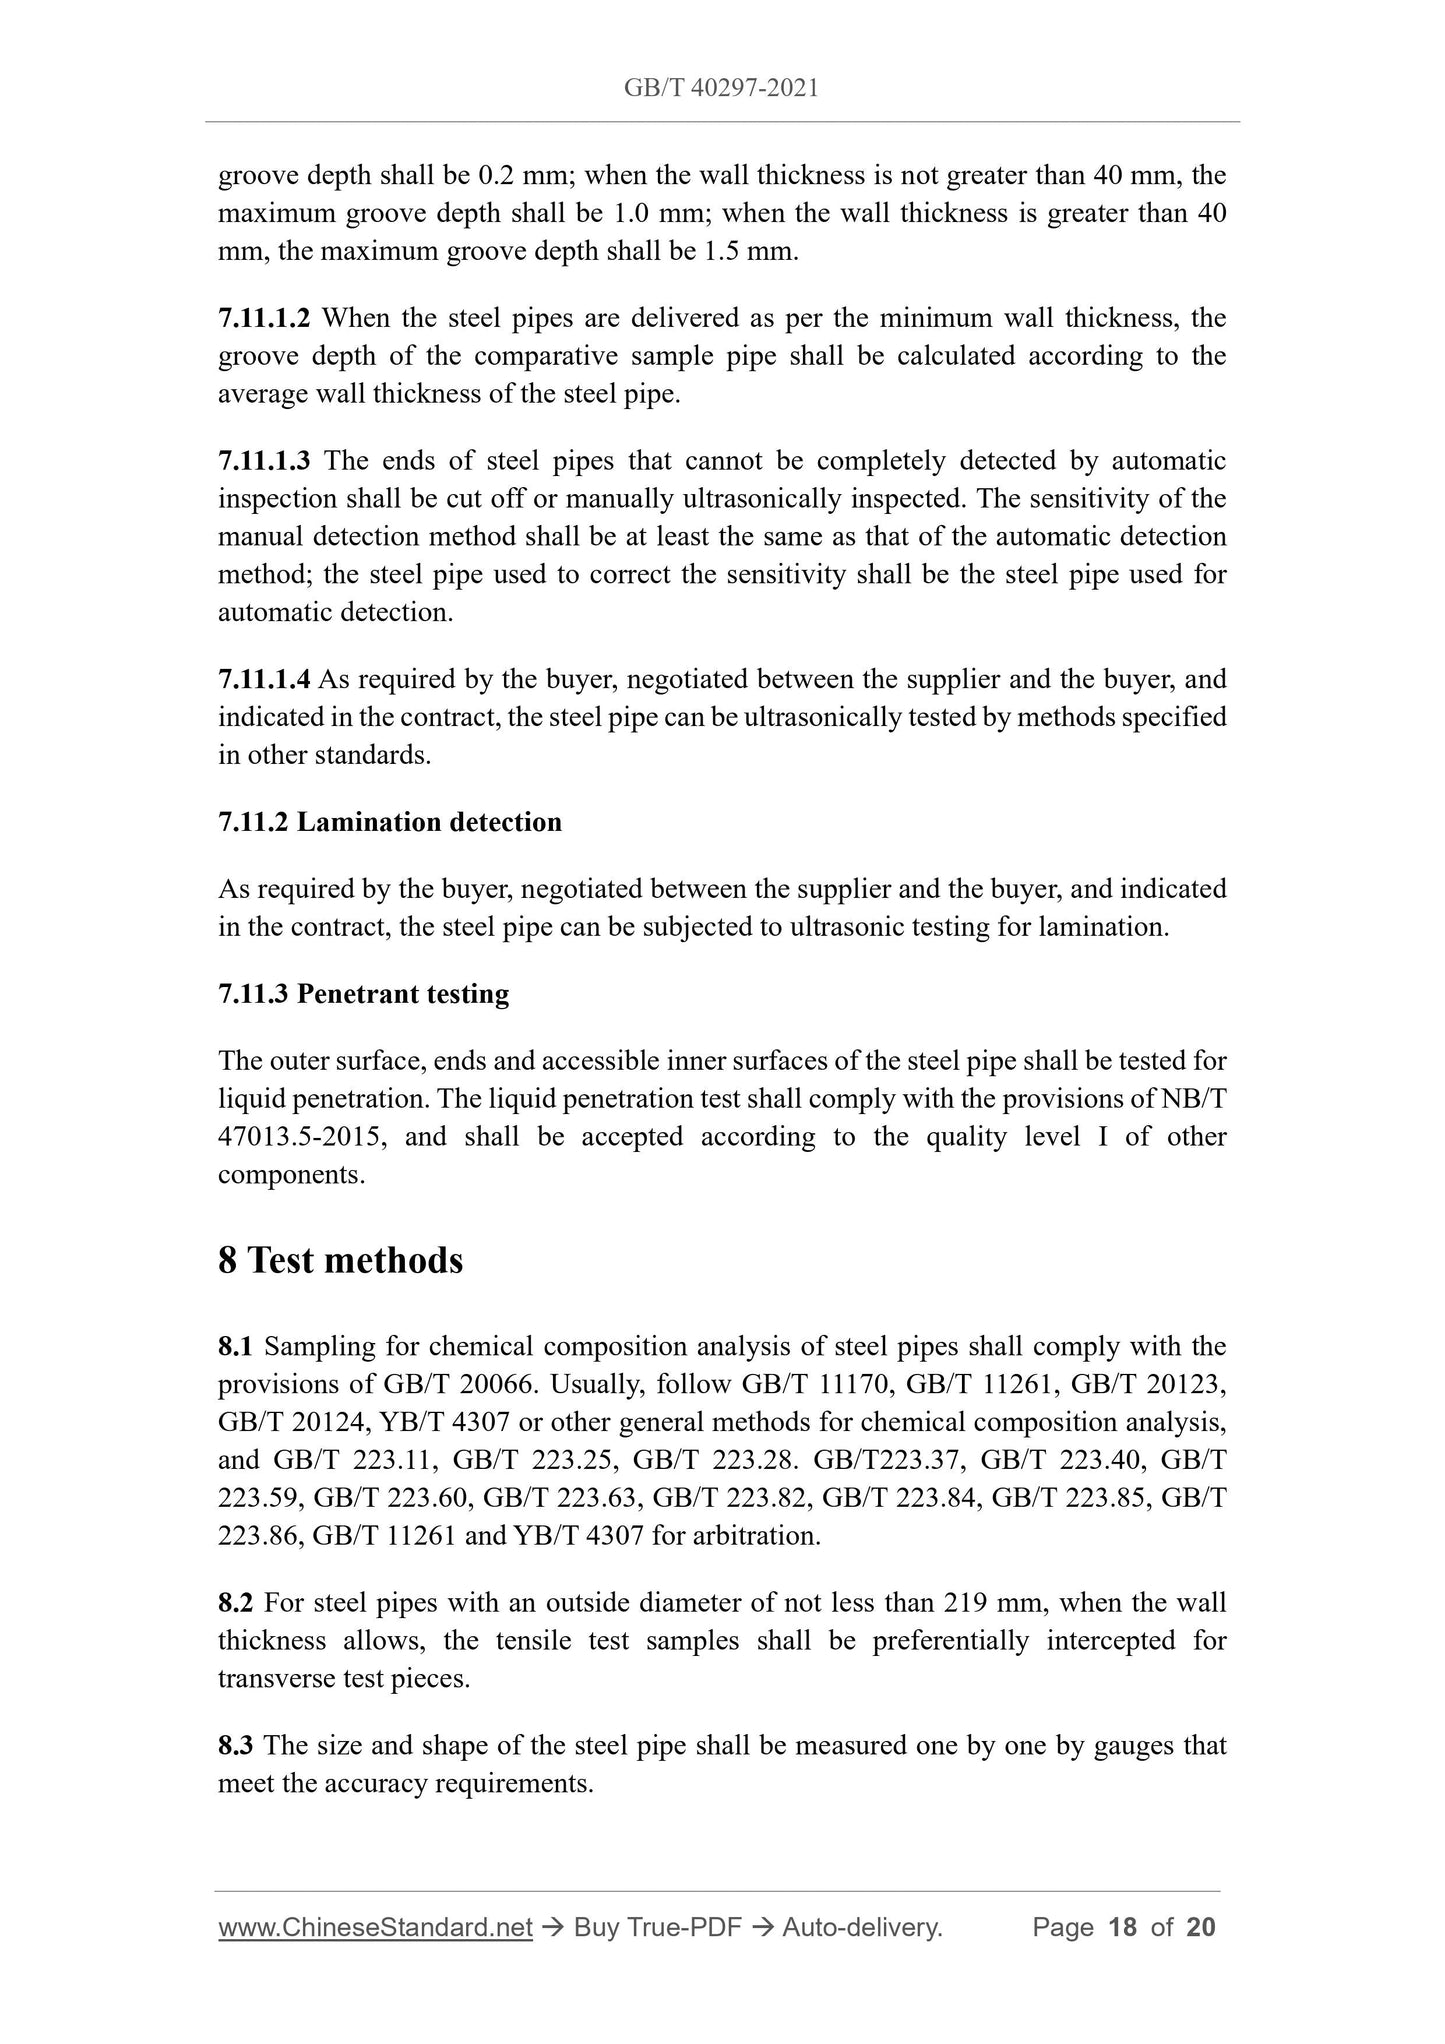 GB/T 40297-2021 Page 10